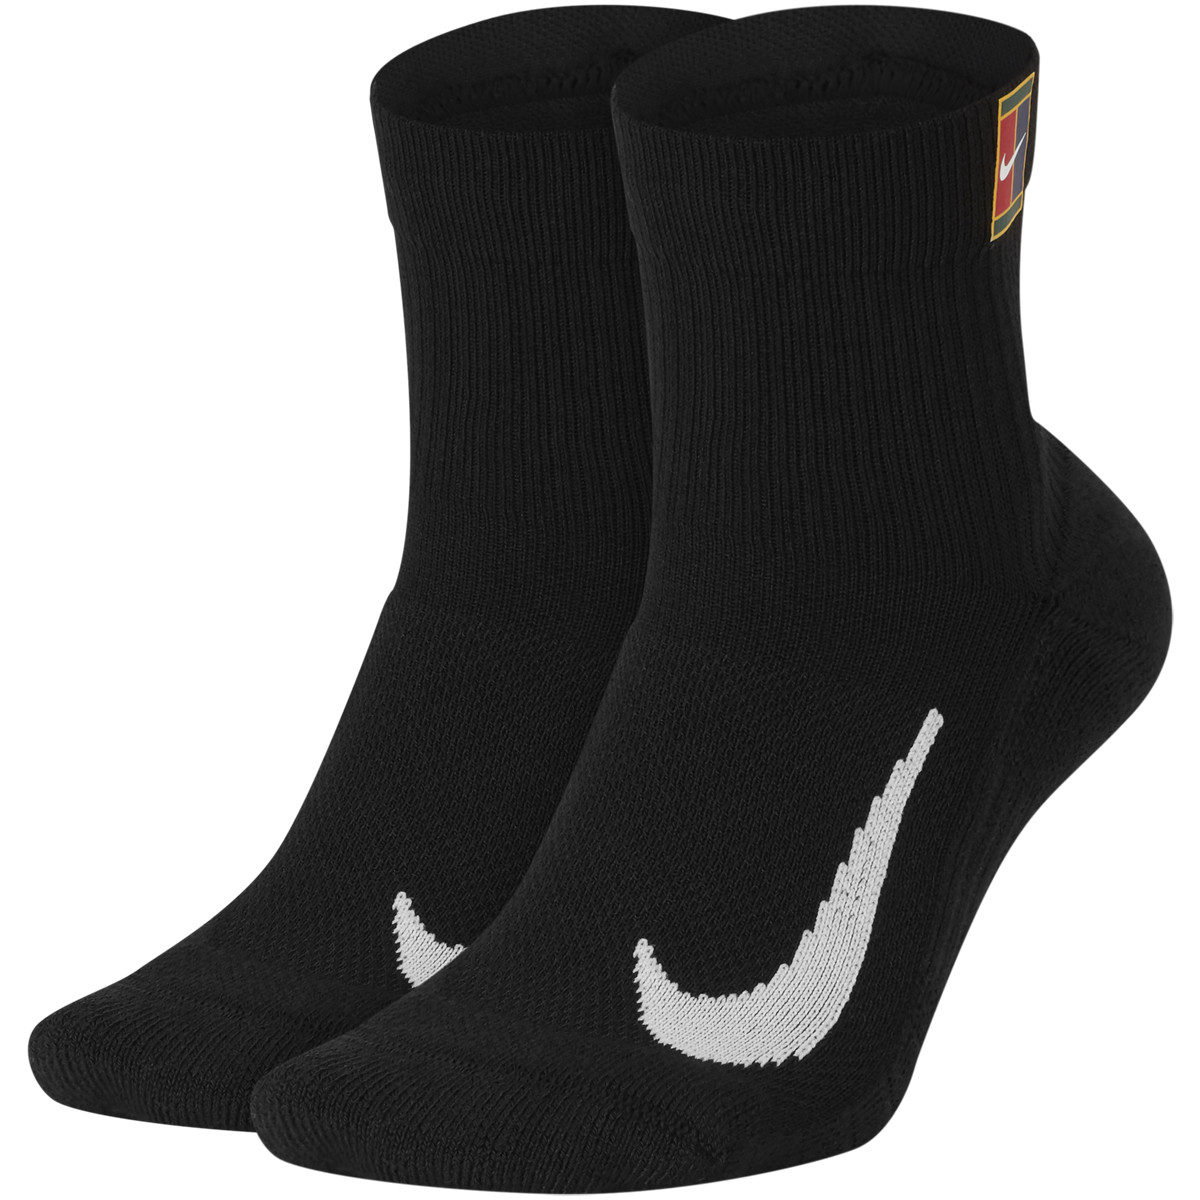 2 PARES DE CALCETINES NIKE MUJER ANKLE - NIKE - Mujer - Ropa